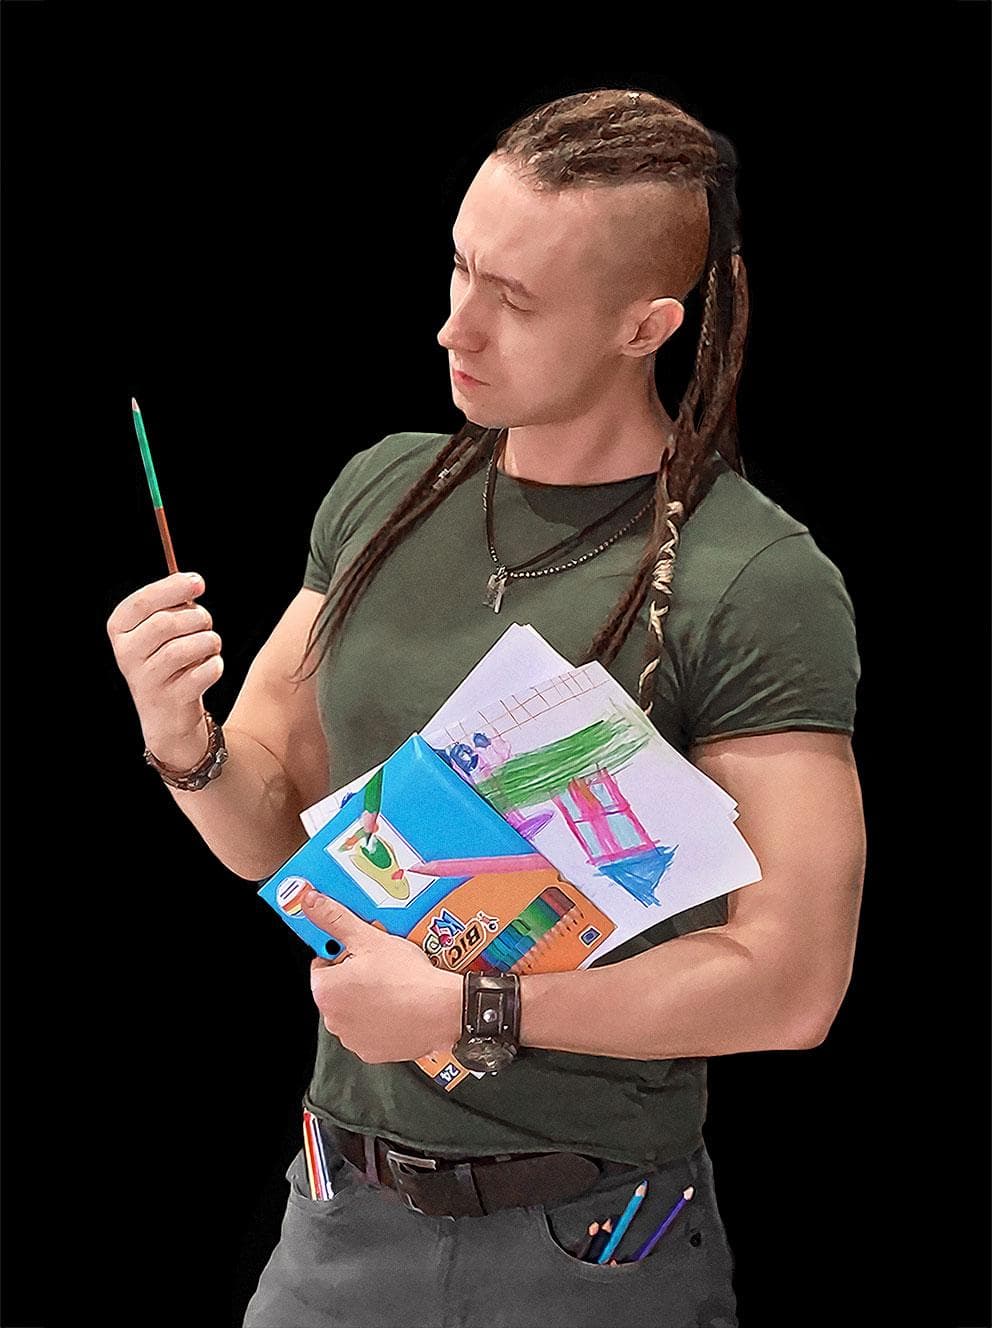 Daniel Wasiluk, who is wearing a wearing an olive-colored t-shirt with gray jeans, and is holding a stack of children's drawings in his left hand while staring quizically at a teal colored-pencil that he is holding in his right hand